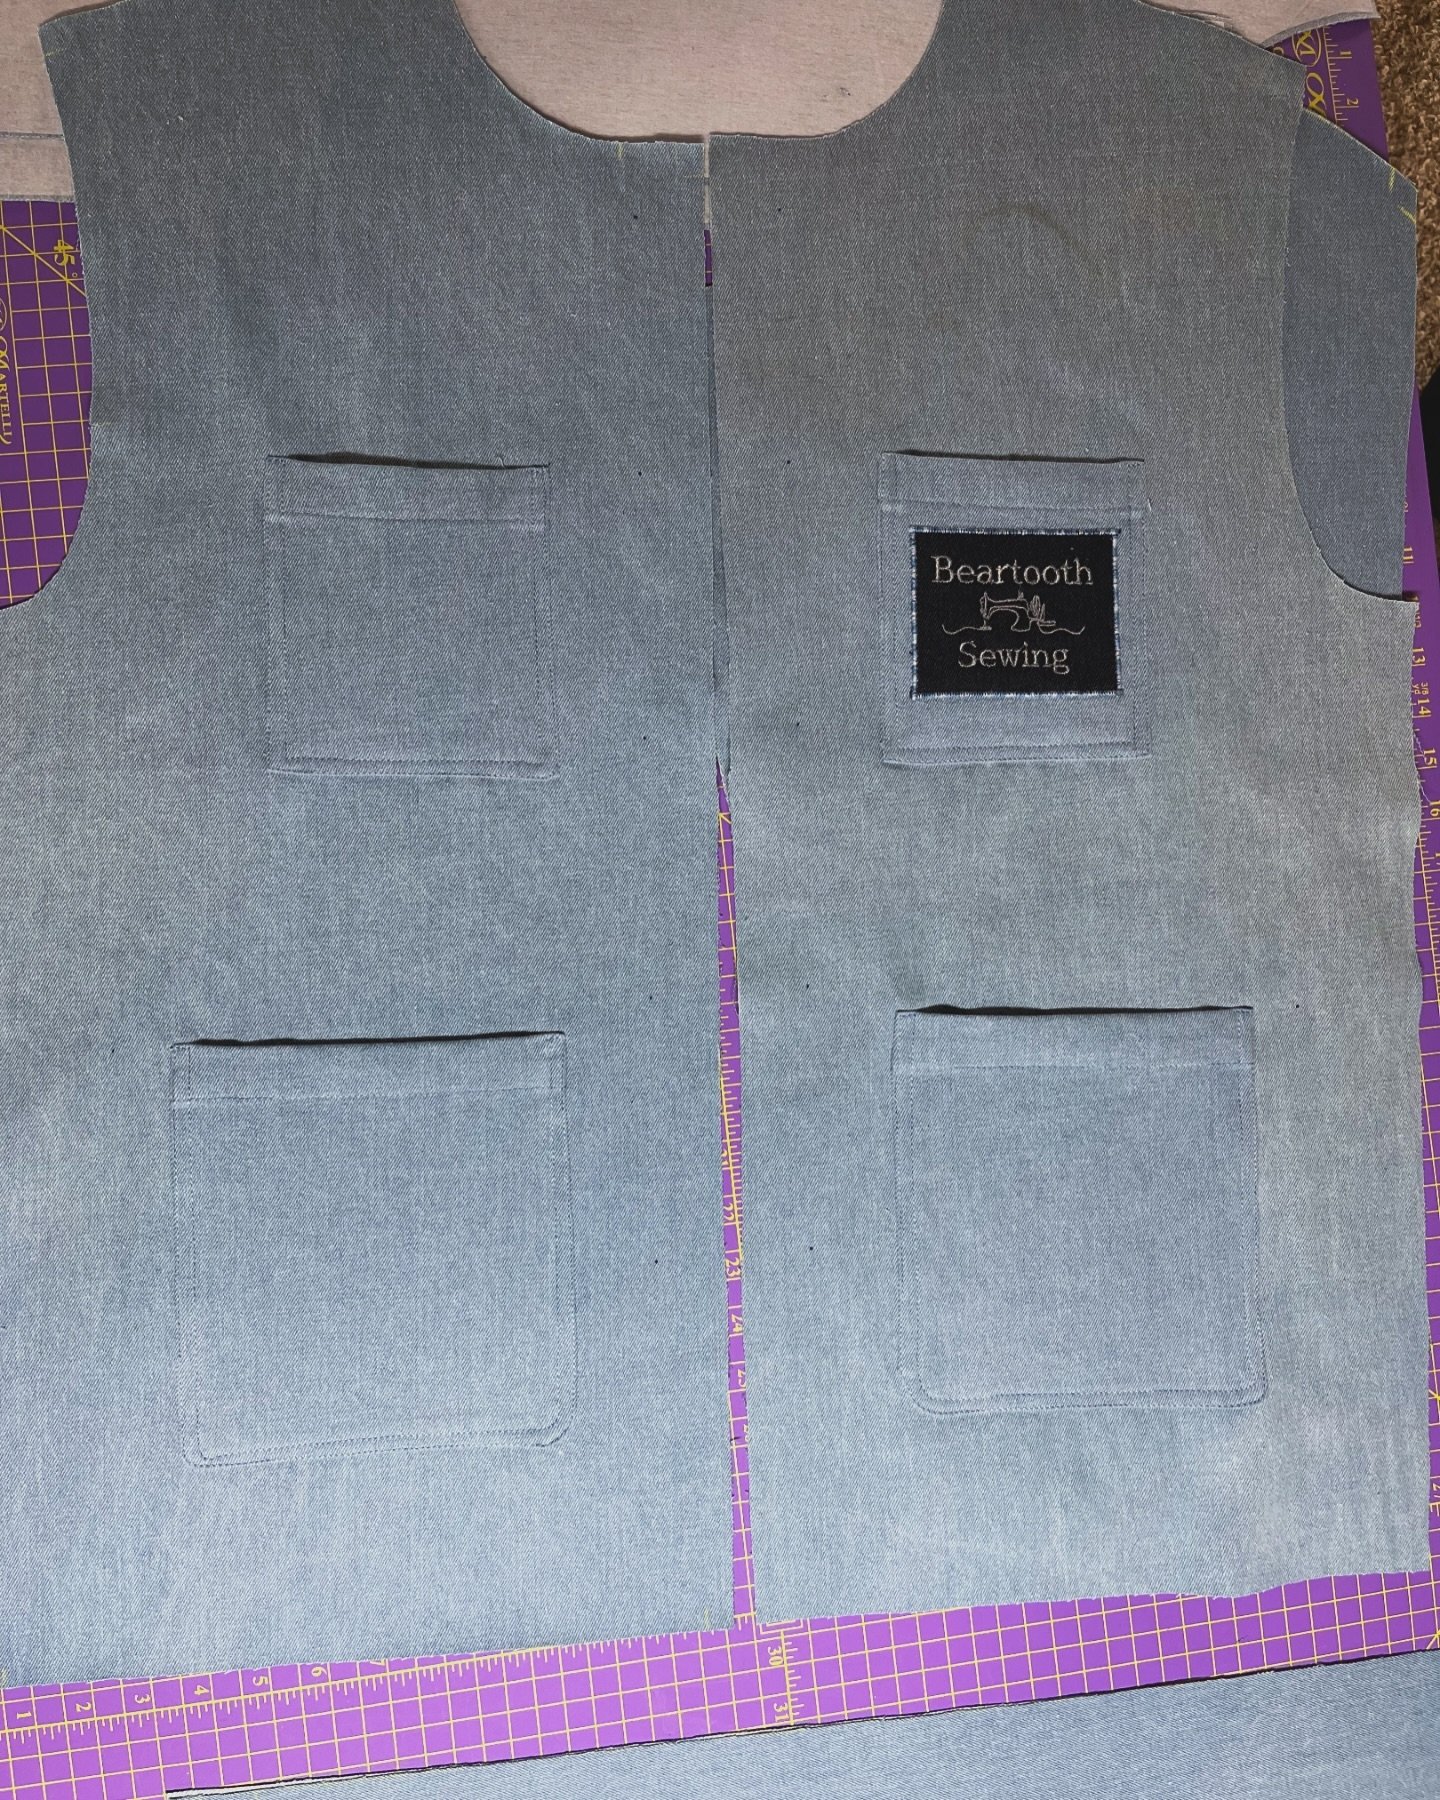 New #denimjacket coming along. Patch pockets, and great for chores!!
#sewing #tailormade #beartoothsewing